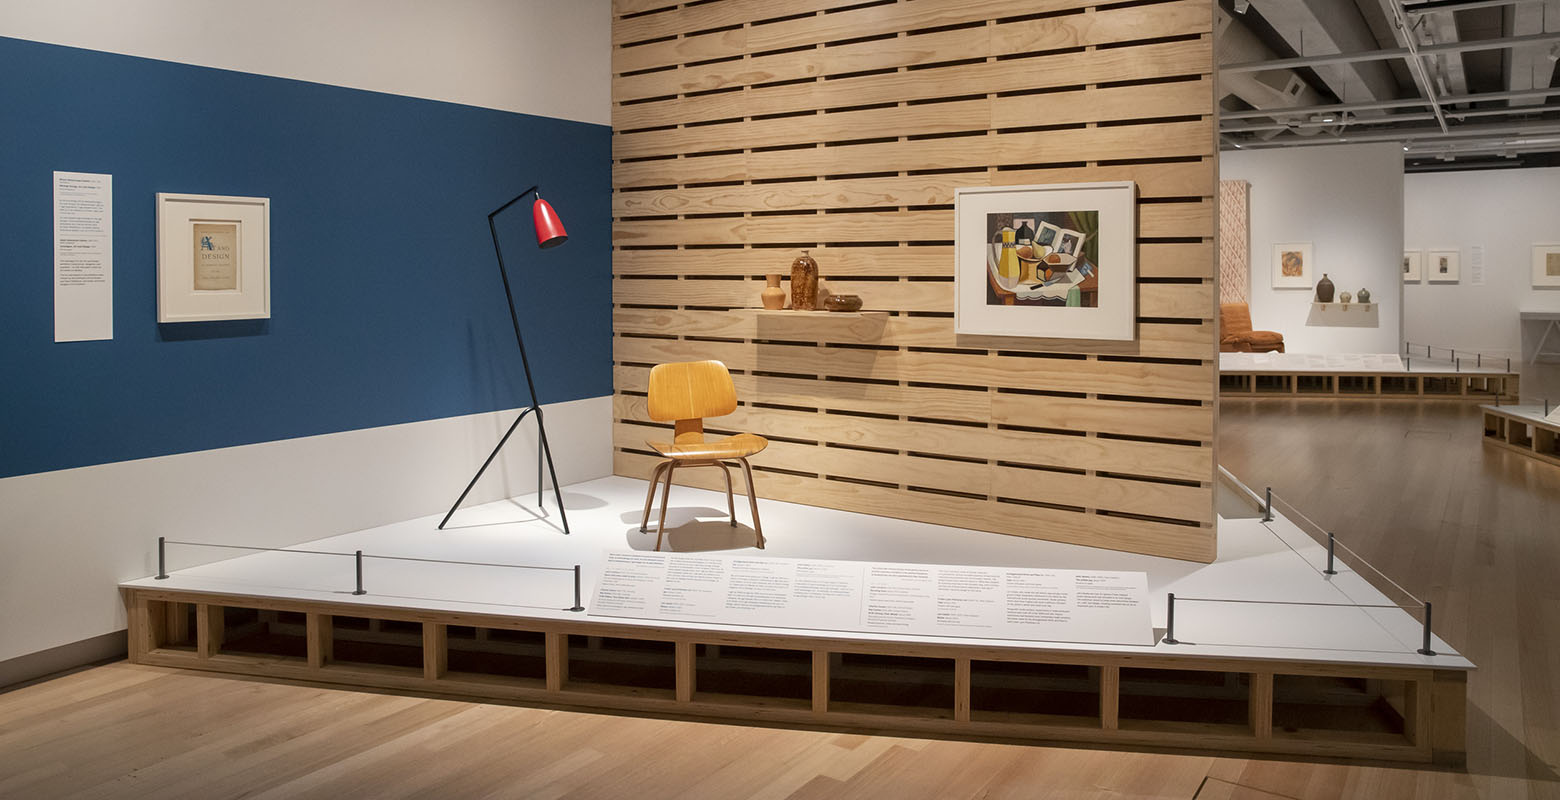 Photo of exhibition view. On a raised platform sits a chair and lamp, with a wooden wall behind. On the wall is a painting of a still life and a shelf with ceramics